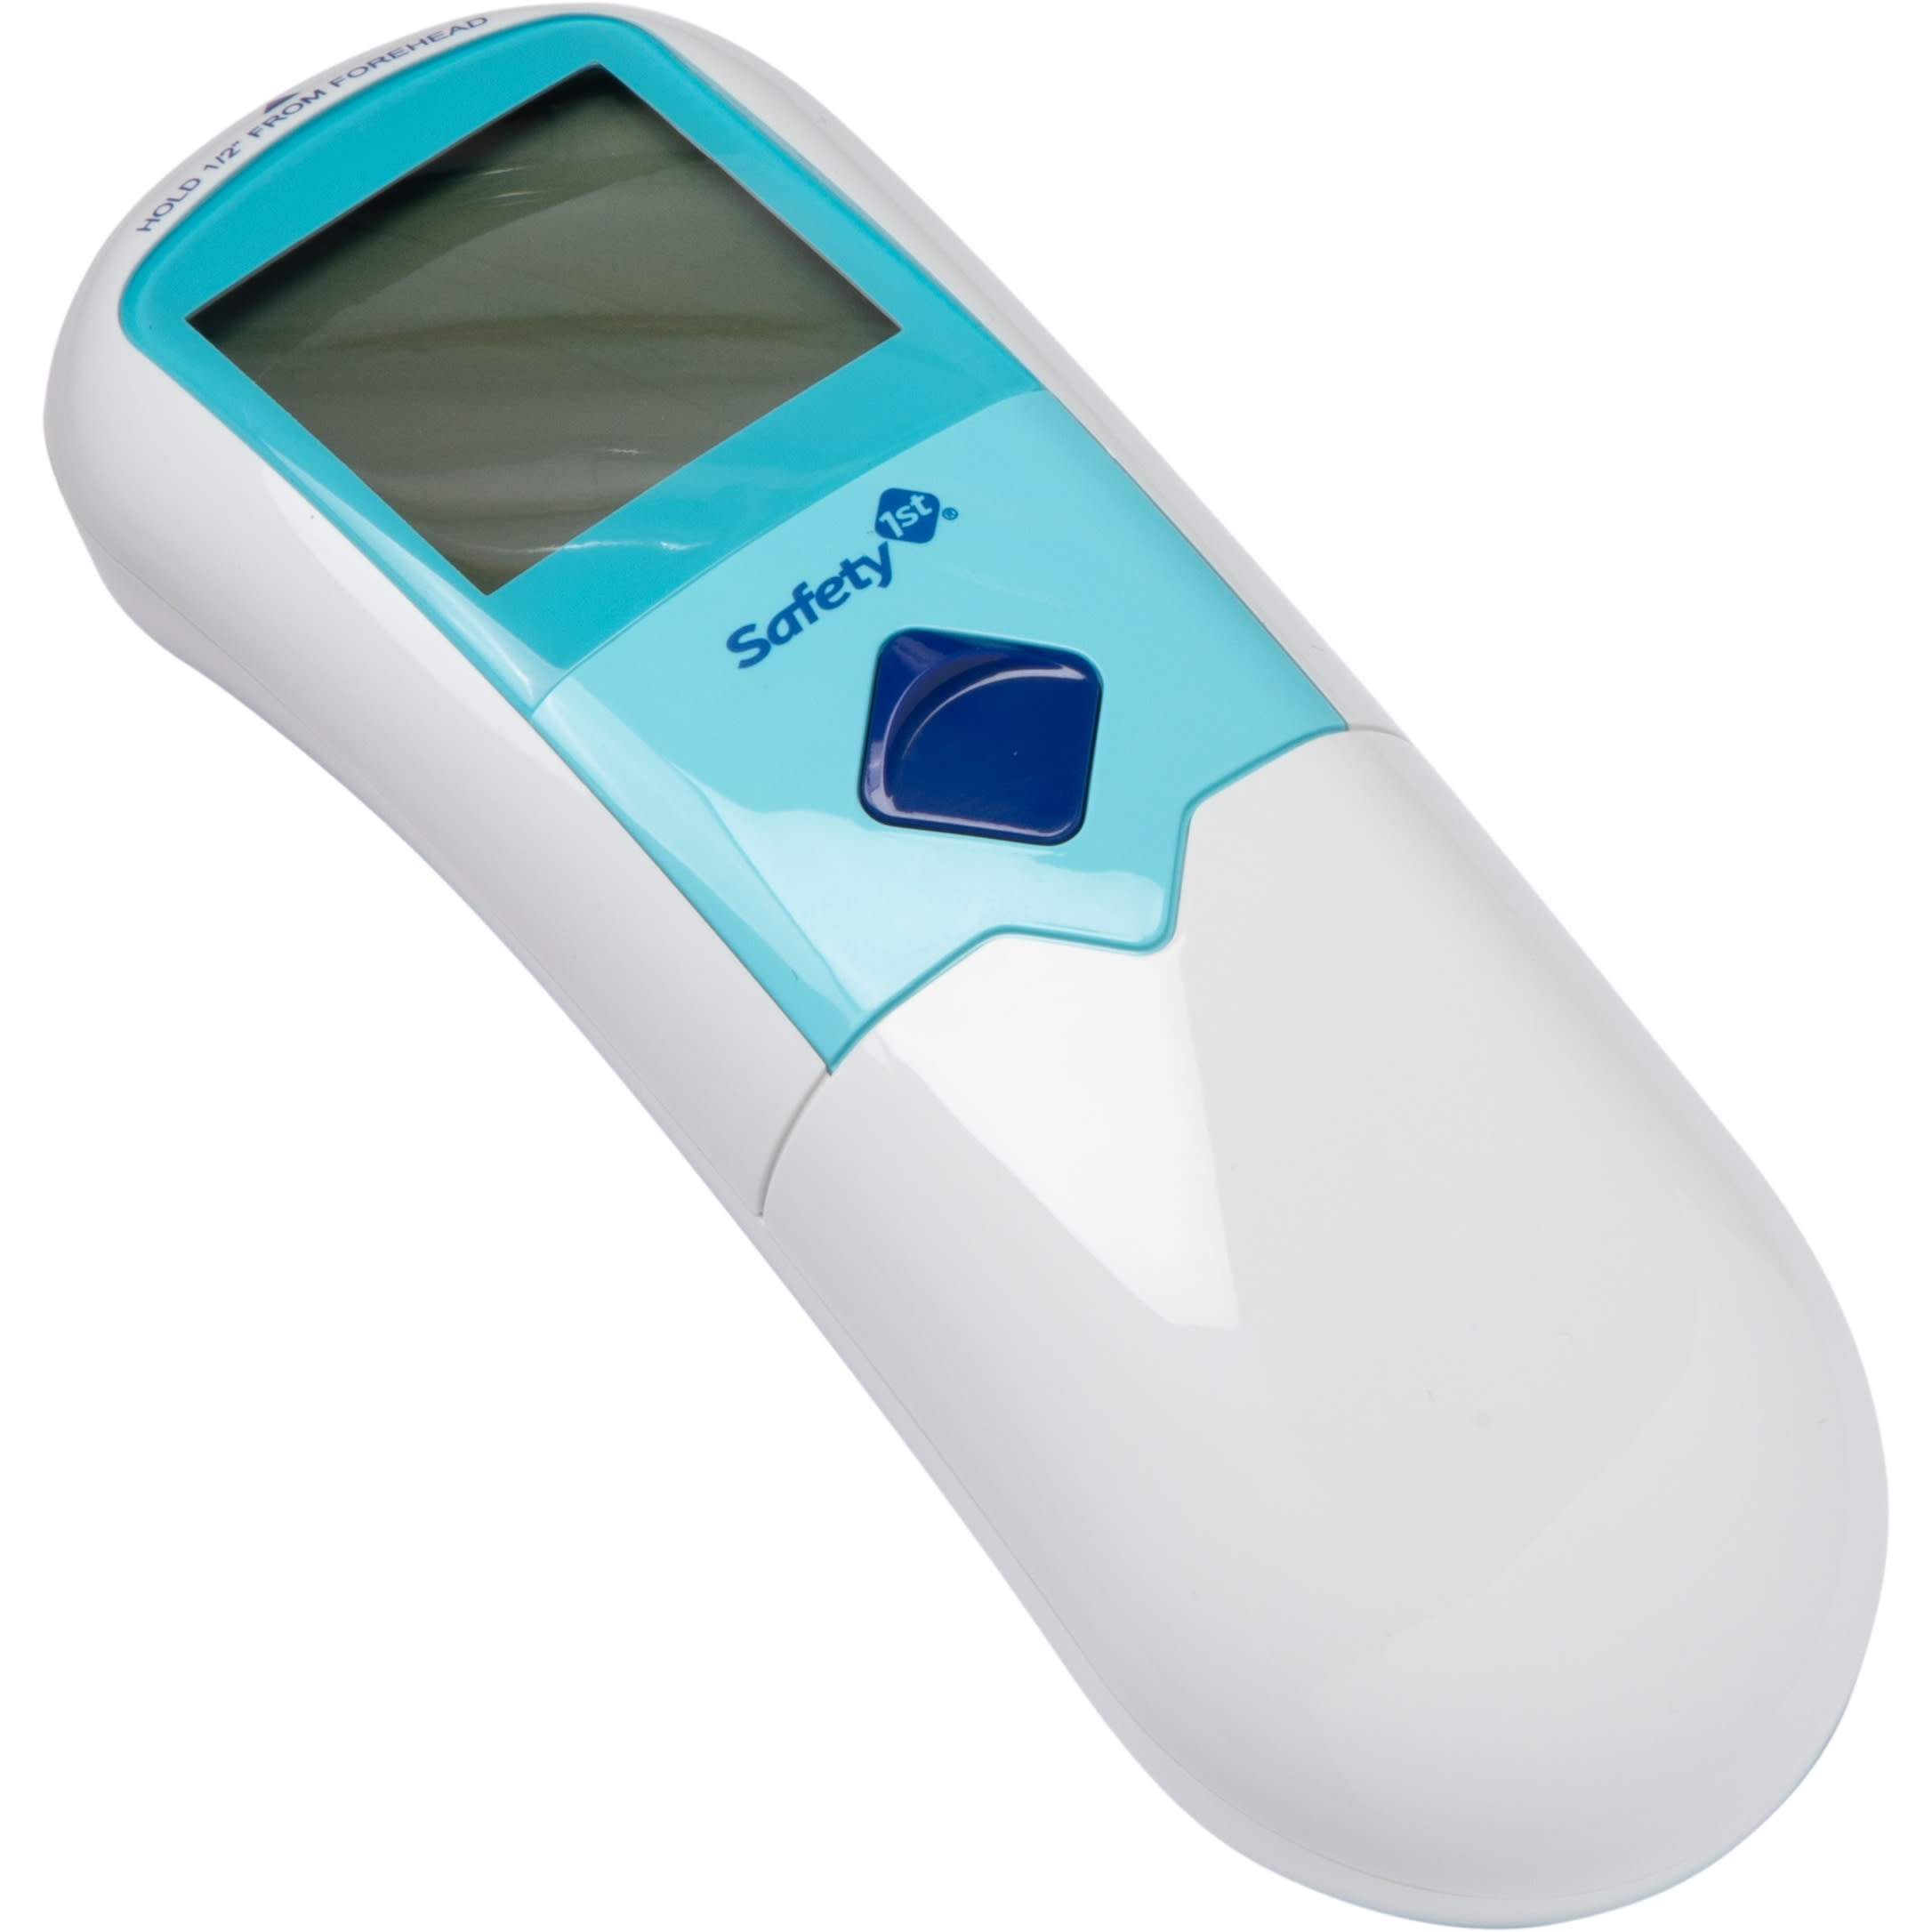 Dr.meter Blue Toddler Leash and Forehead Thermometer